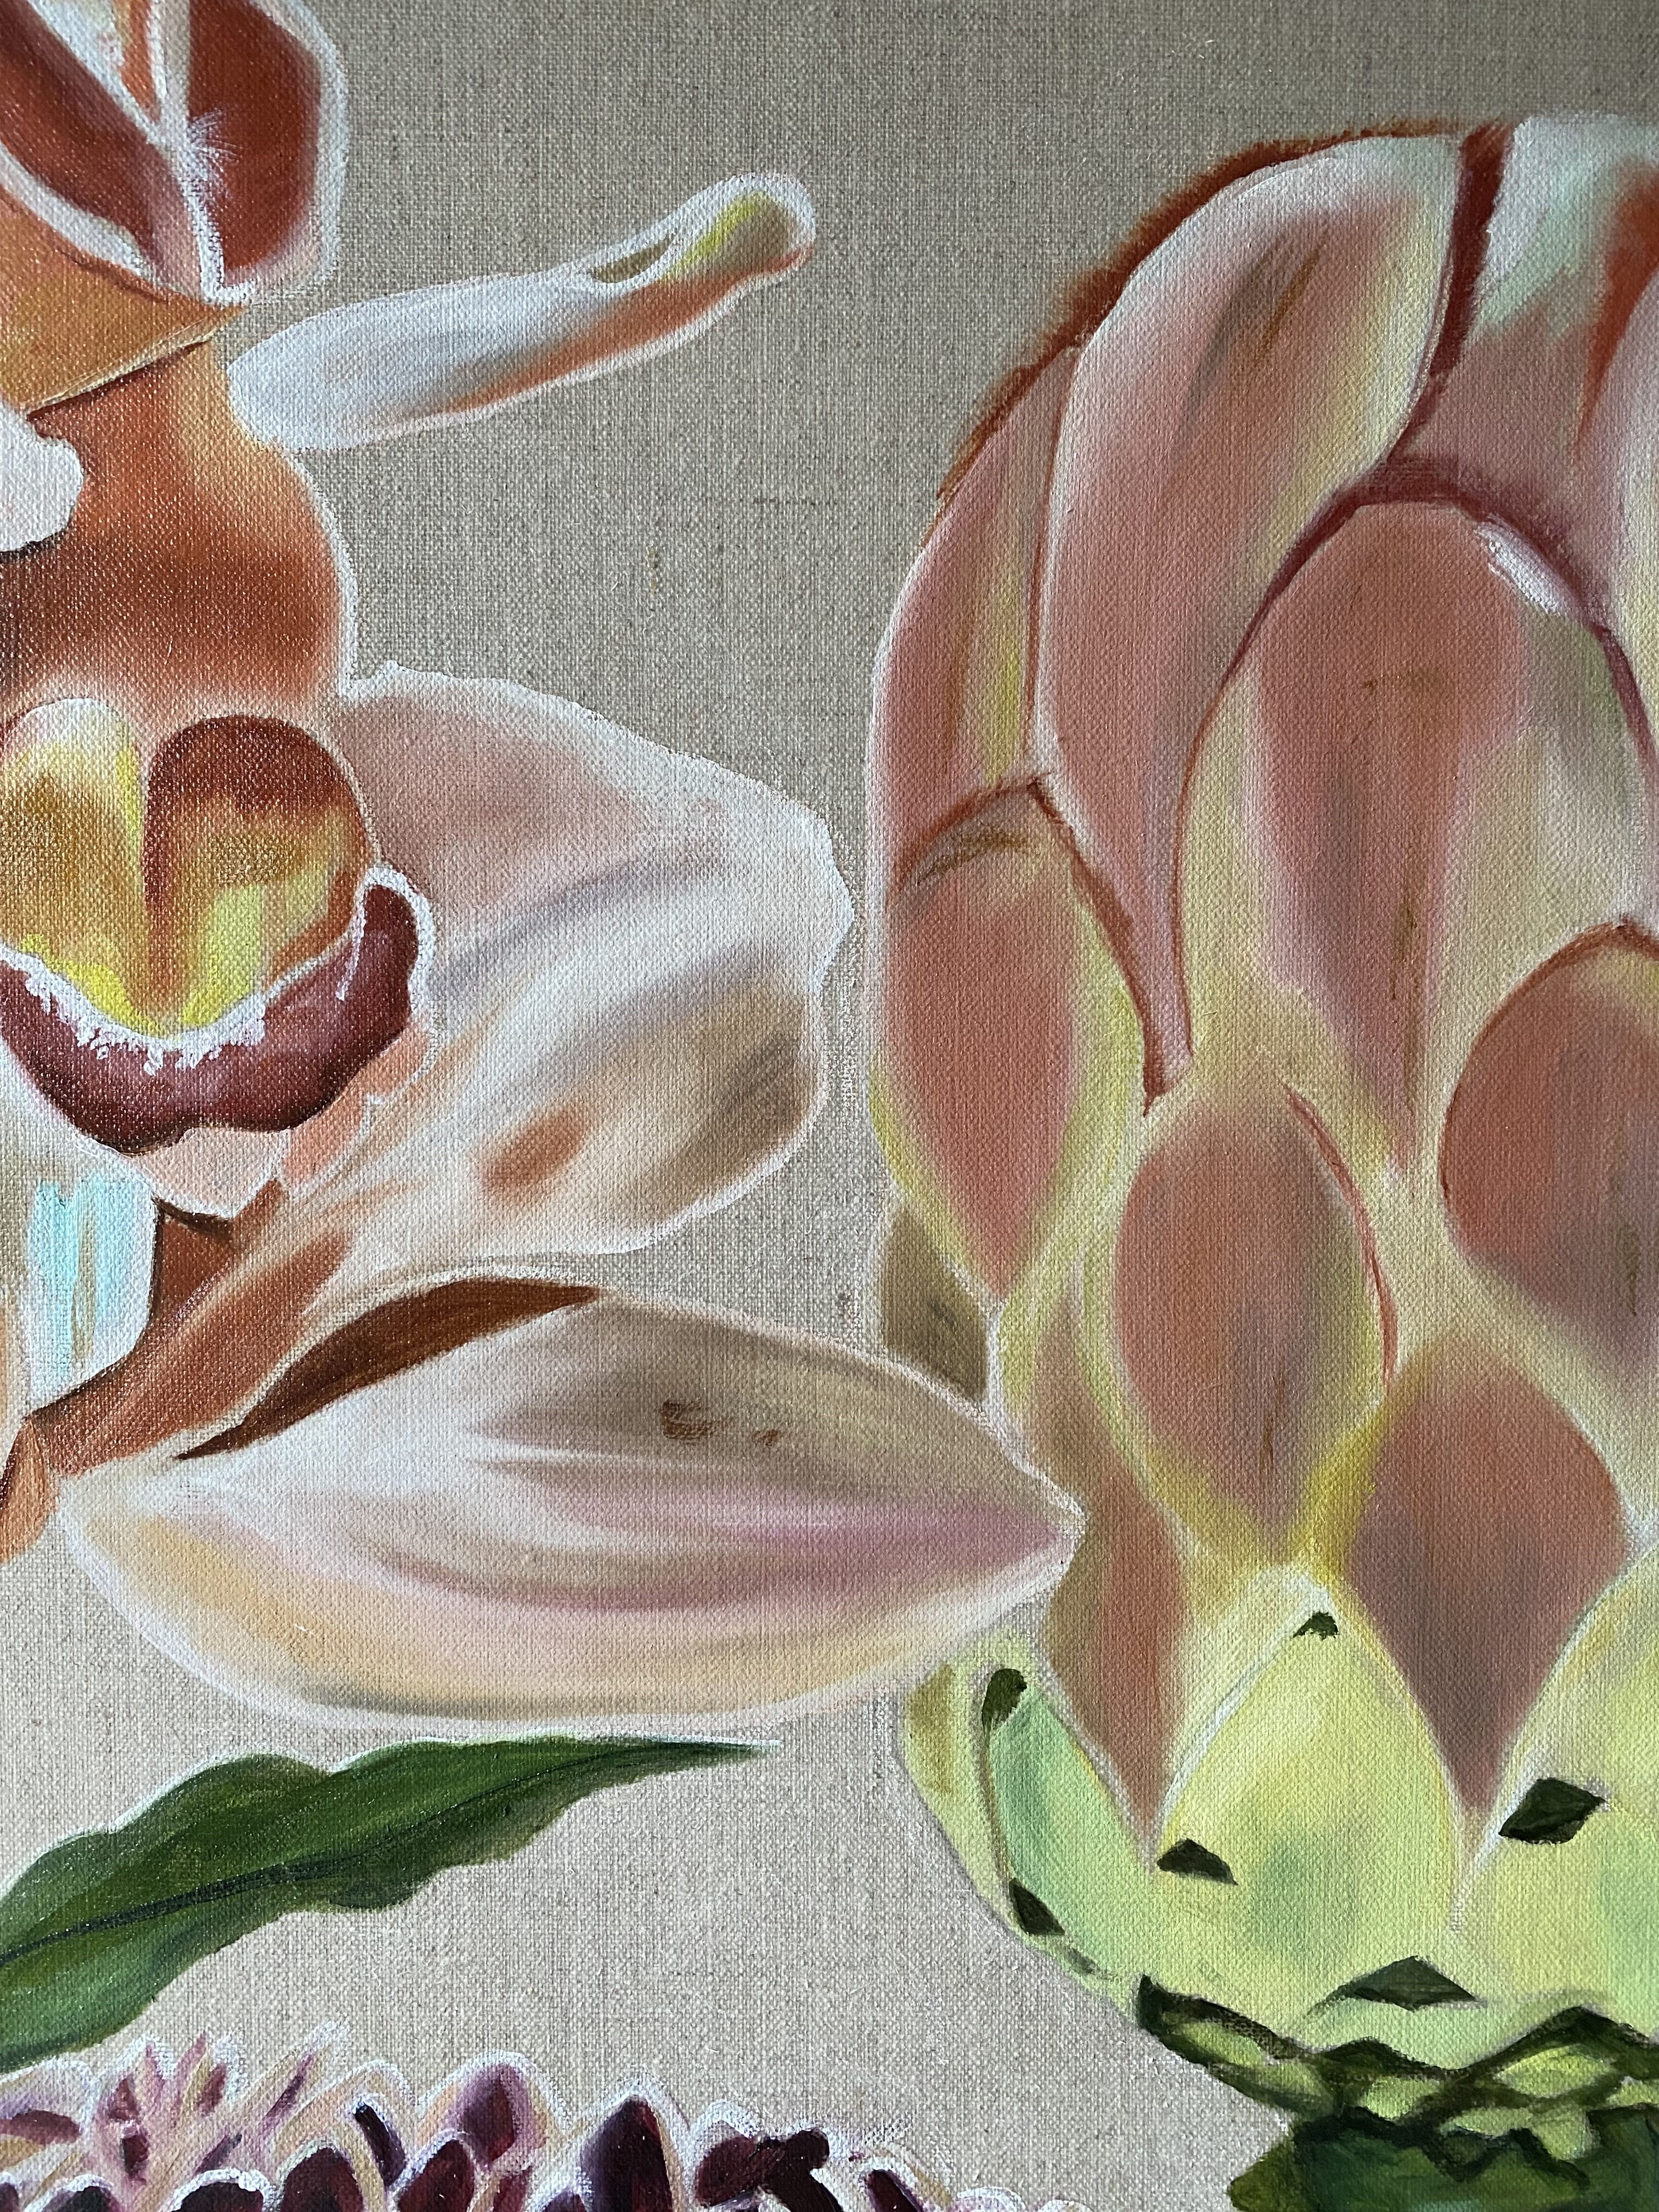 The_Peachy_Orchids_closeup_Wendy_Peters